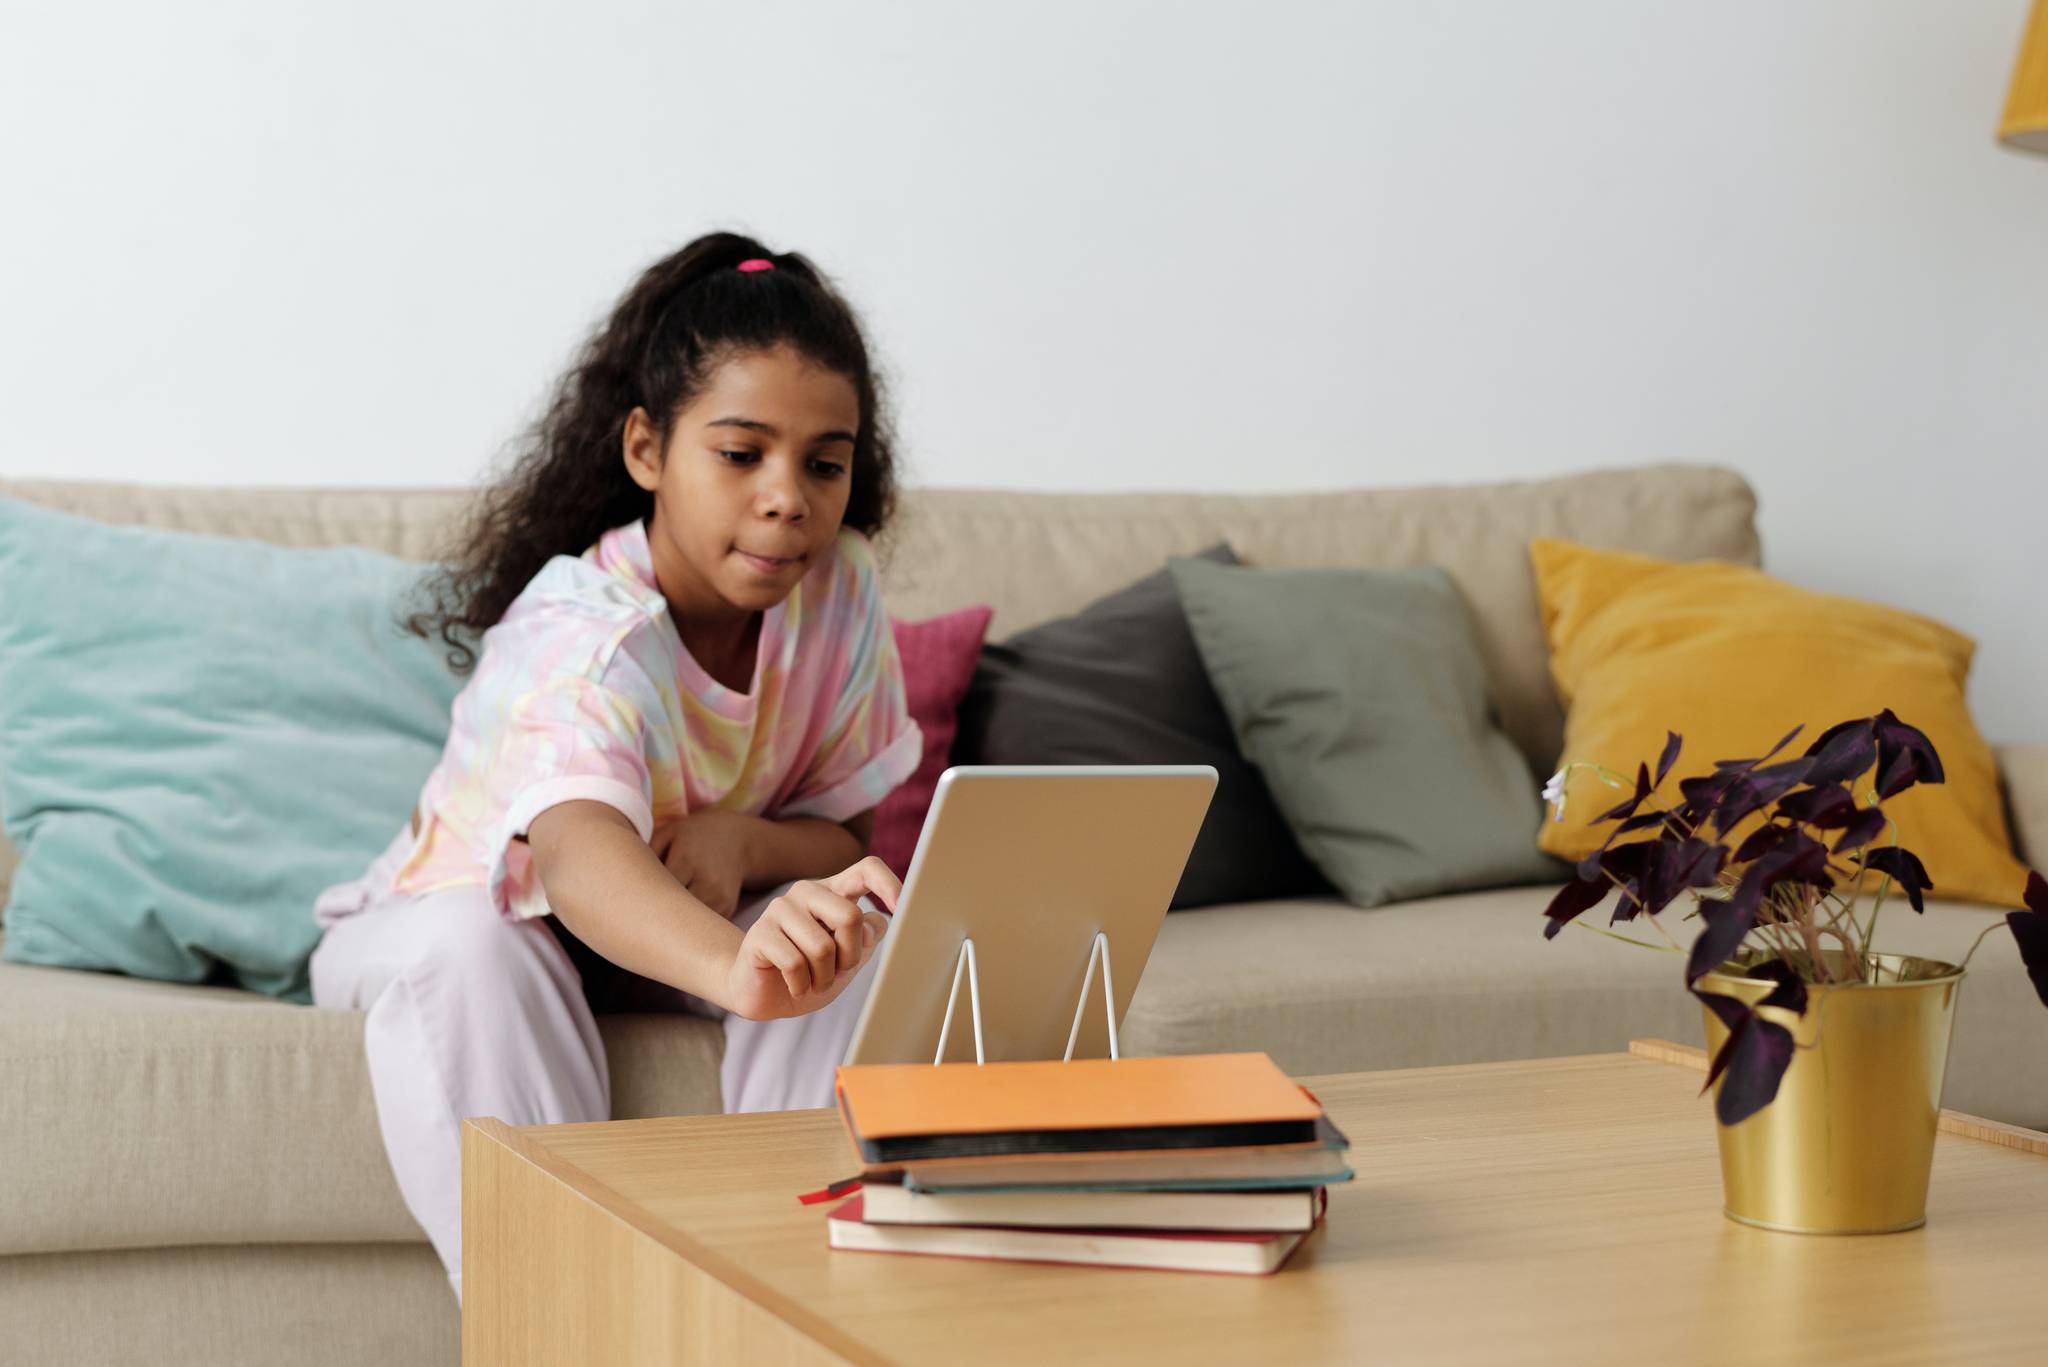 Aumio aims to bring mindfulness to kids through tech